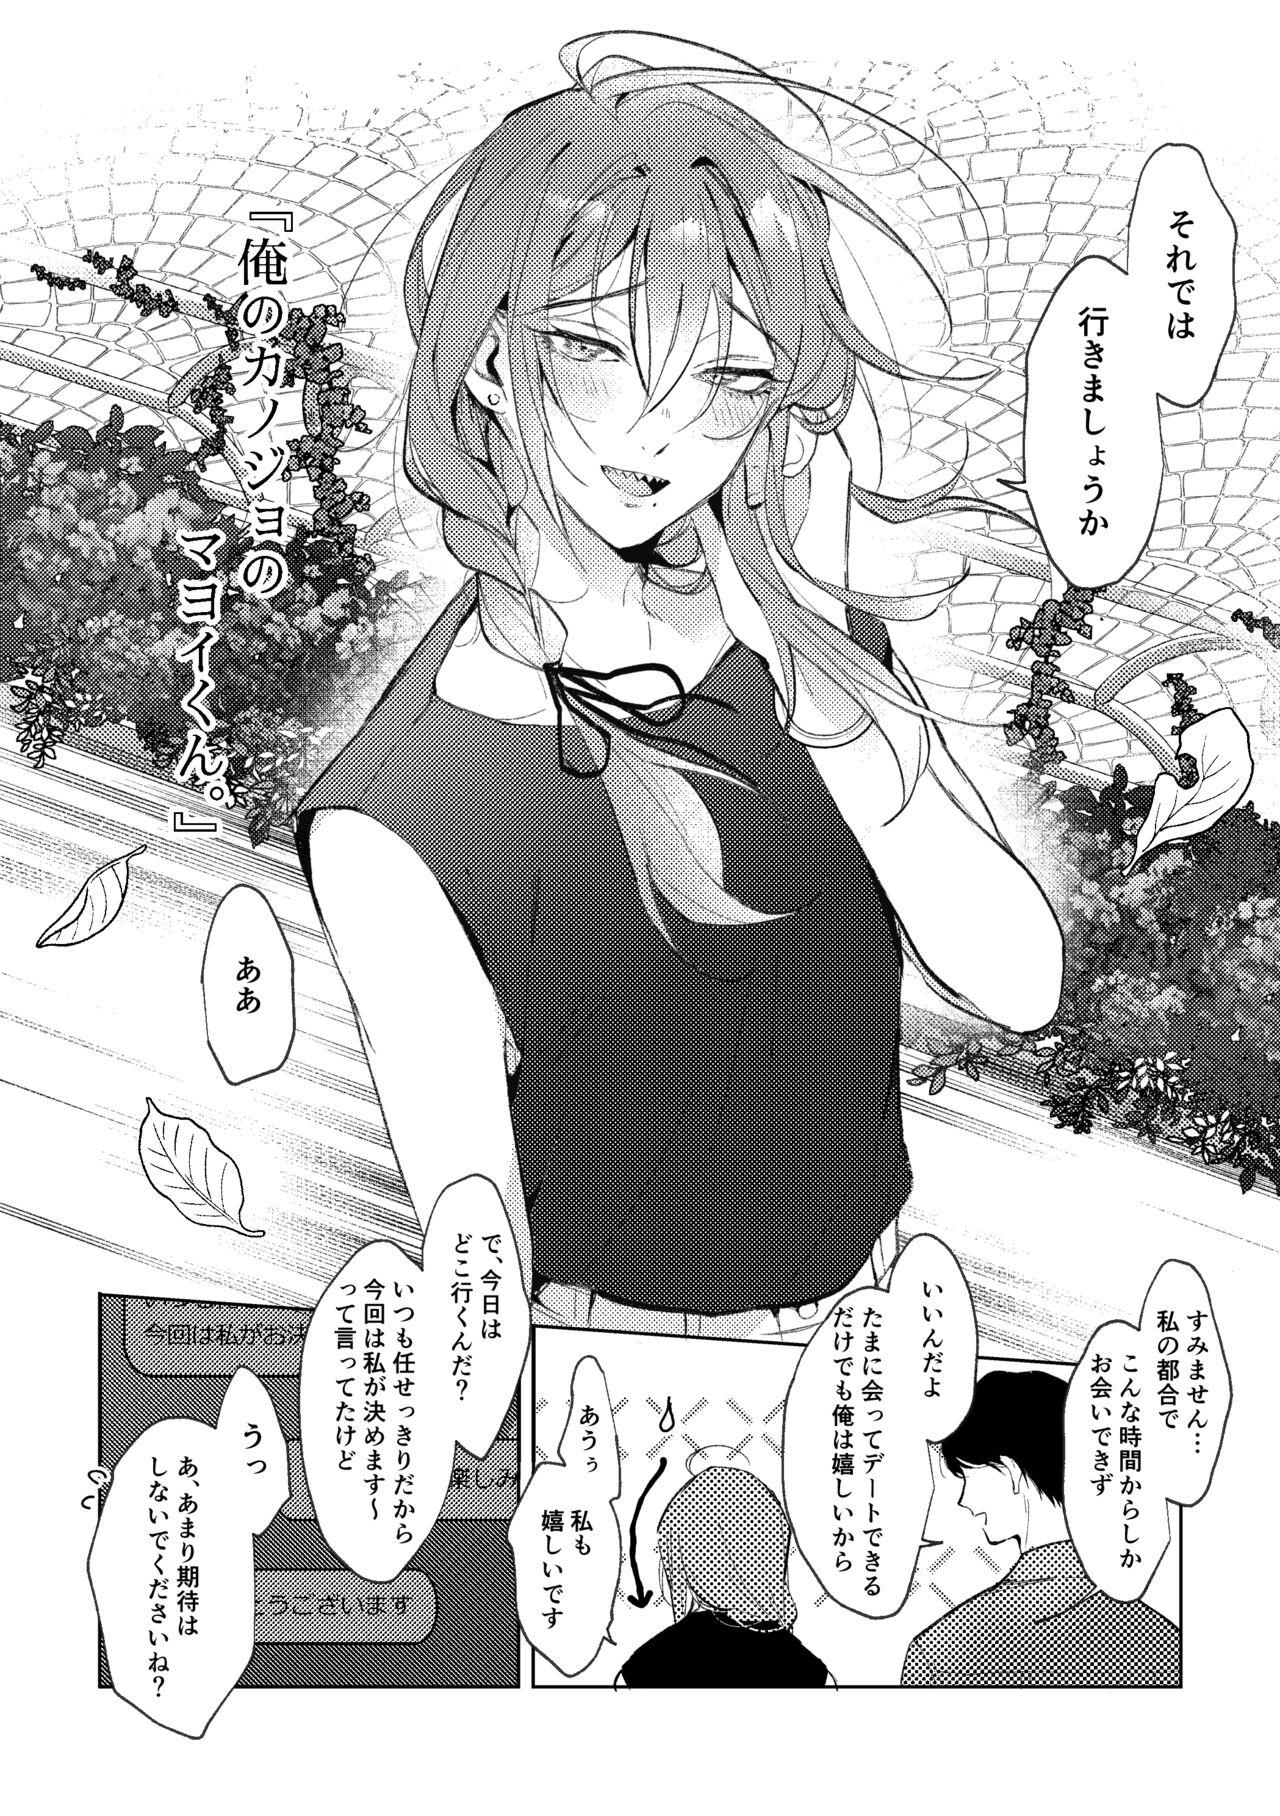 Bubble Butt 俺のカノジョのマヨイくん。 - Ensemble stars Roleplay - Page 7